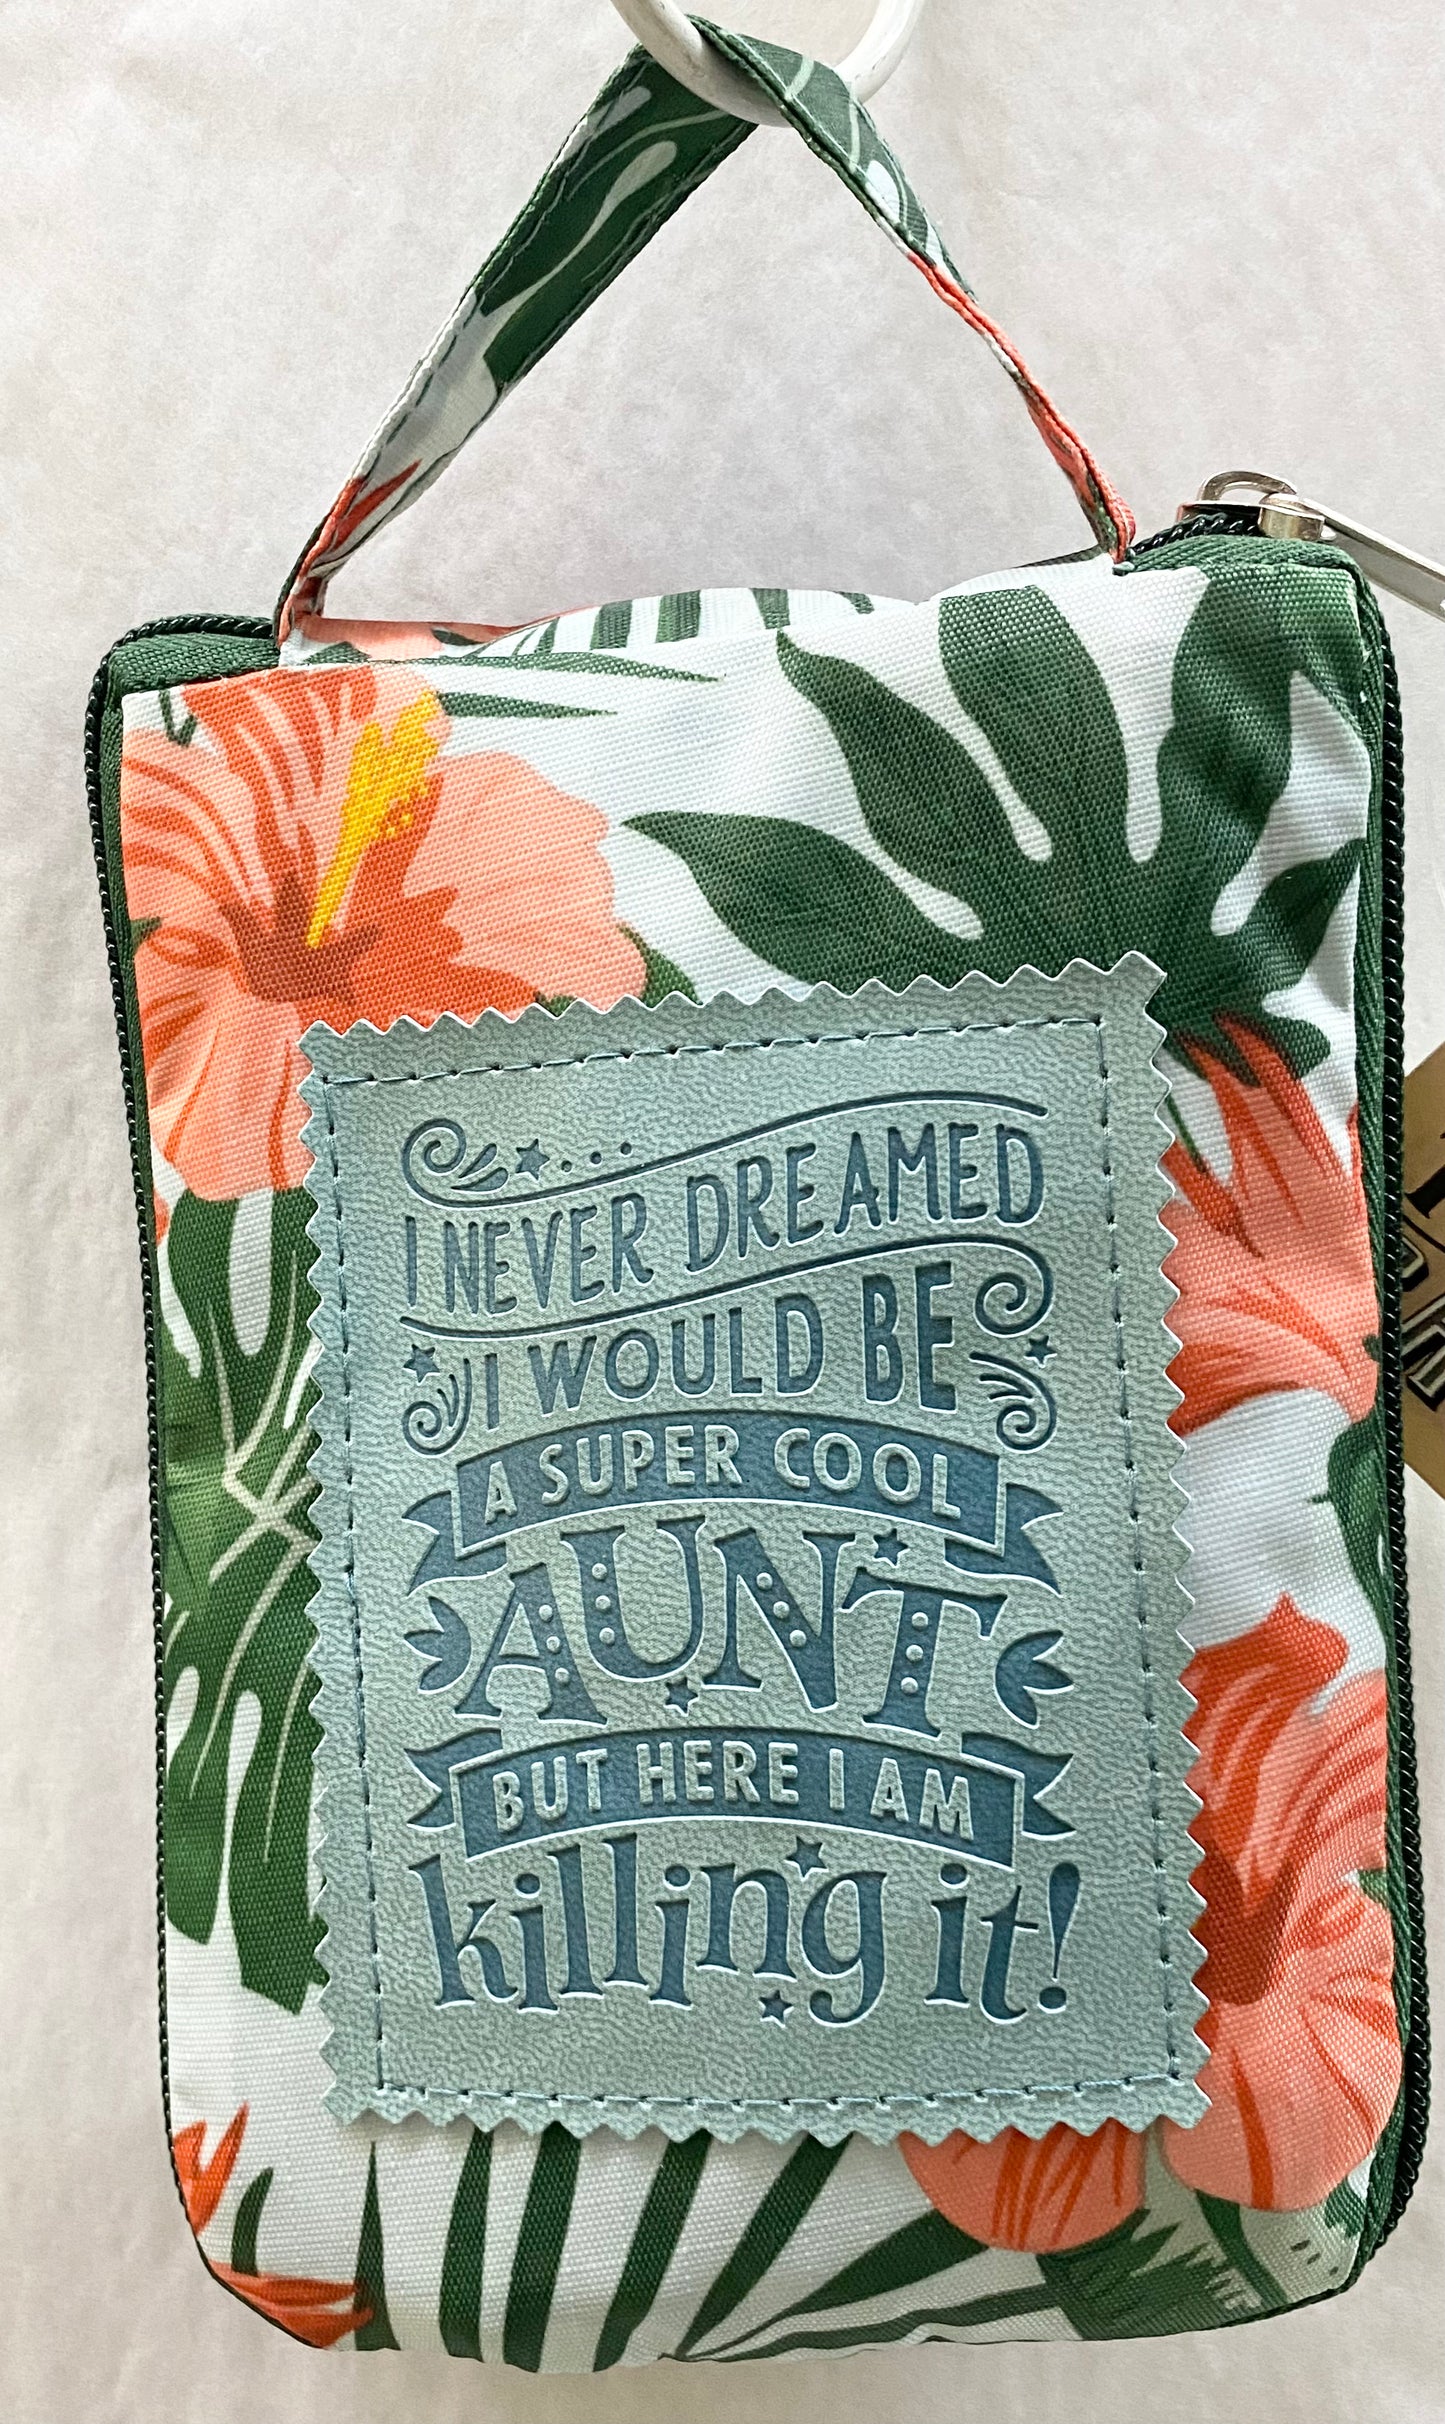 Reusable Tote Bag - “I never dreamed I would be a super cool Aunt but here I am killing it”